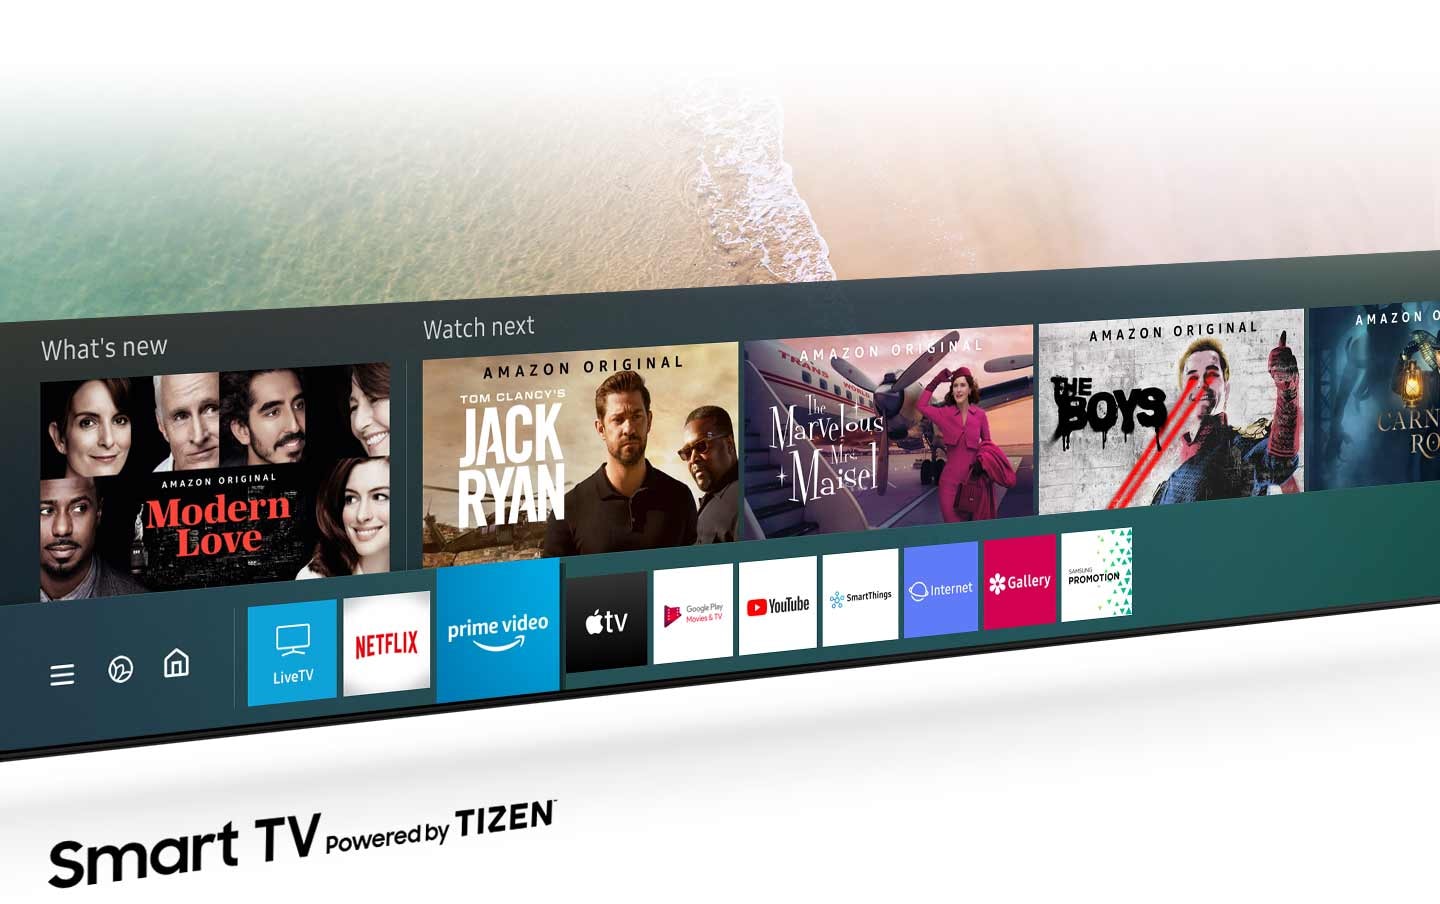 HD TV is displaying Smart Hub Powered by TIZEN on its screen.